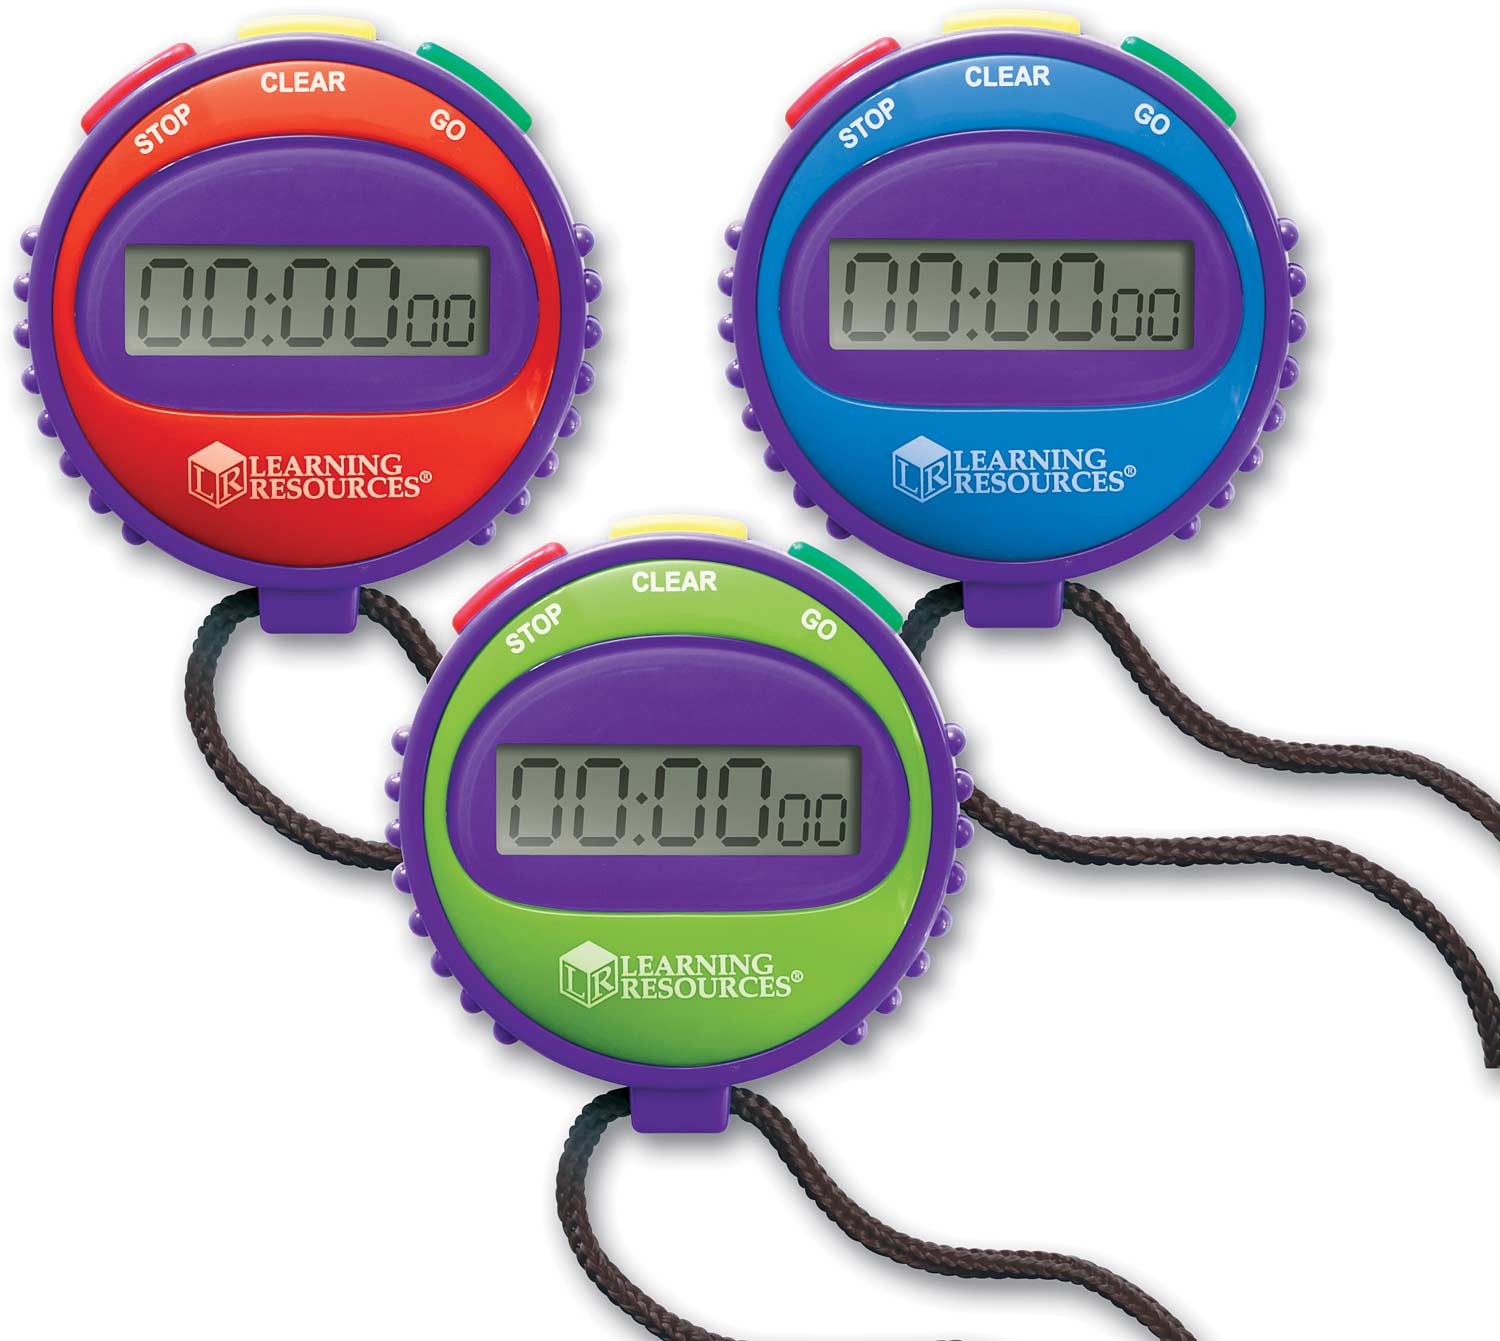 Simple Stopwatch by Educational Insights on Barstons Childs Play1500 x 1341